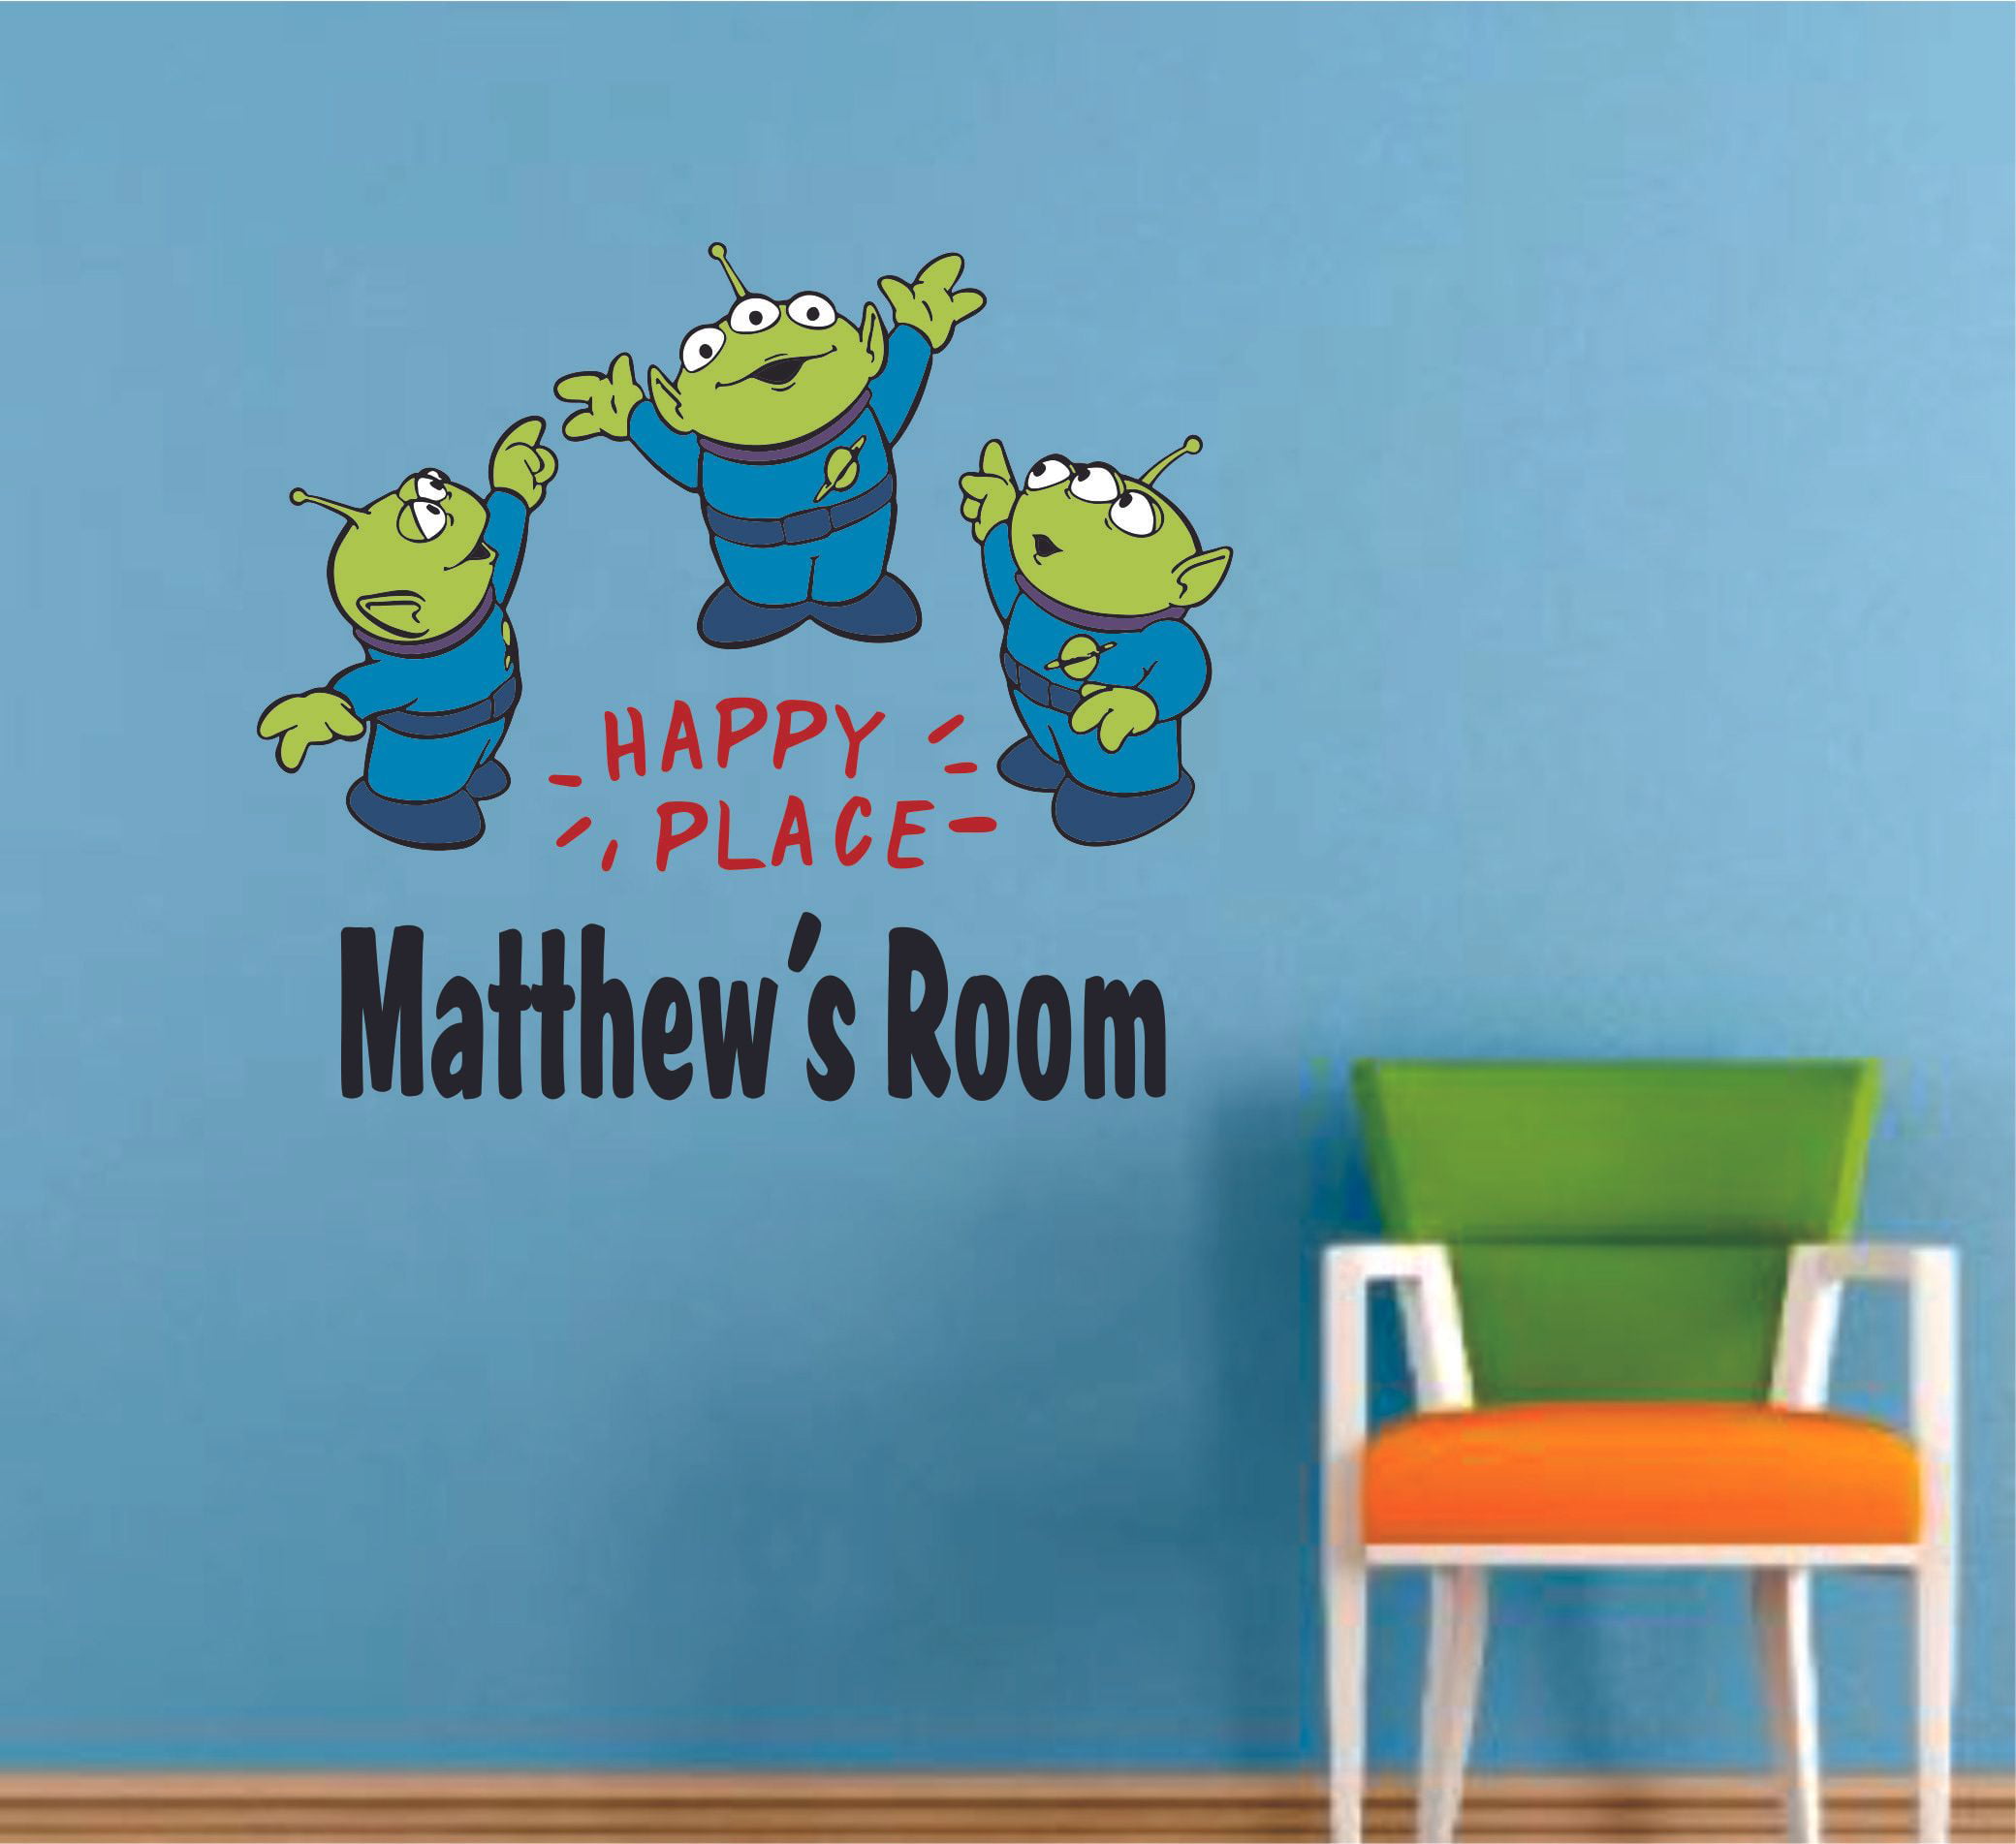 Details about   Custom Name Wall Sticker Kids Bedroom Nursery Vinyl Decoration FREE SHIPPING 